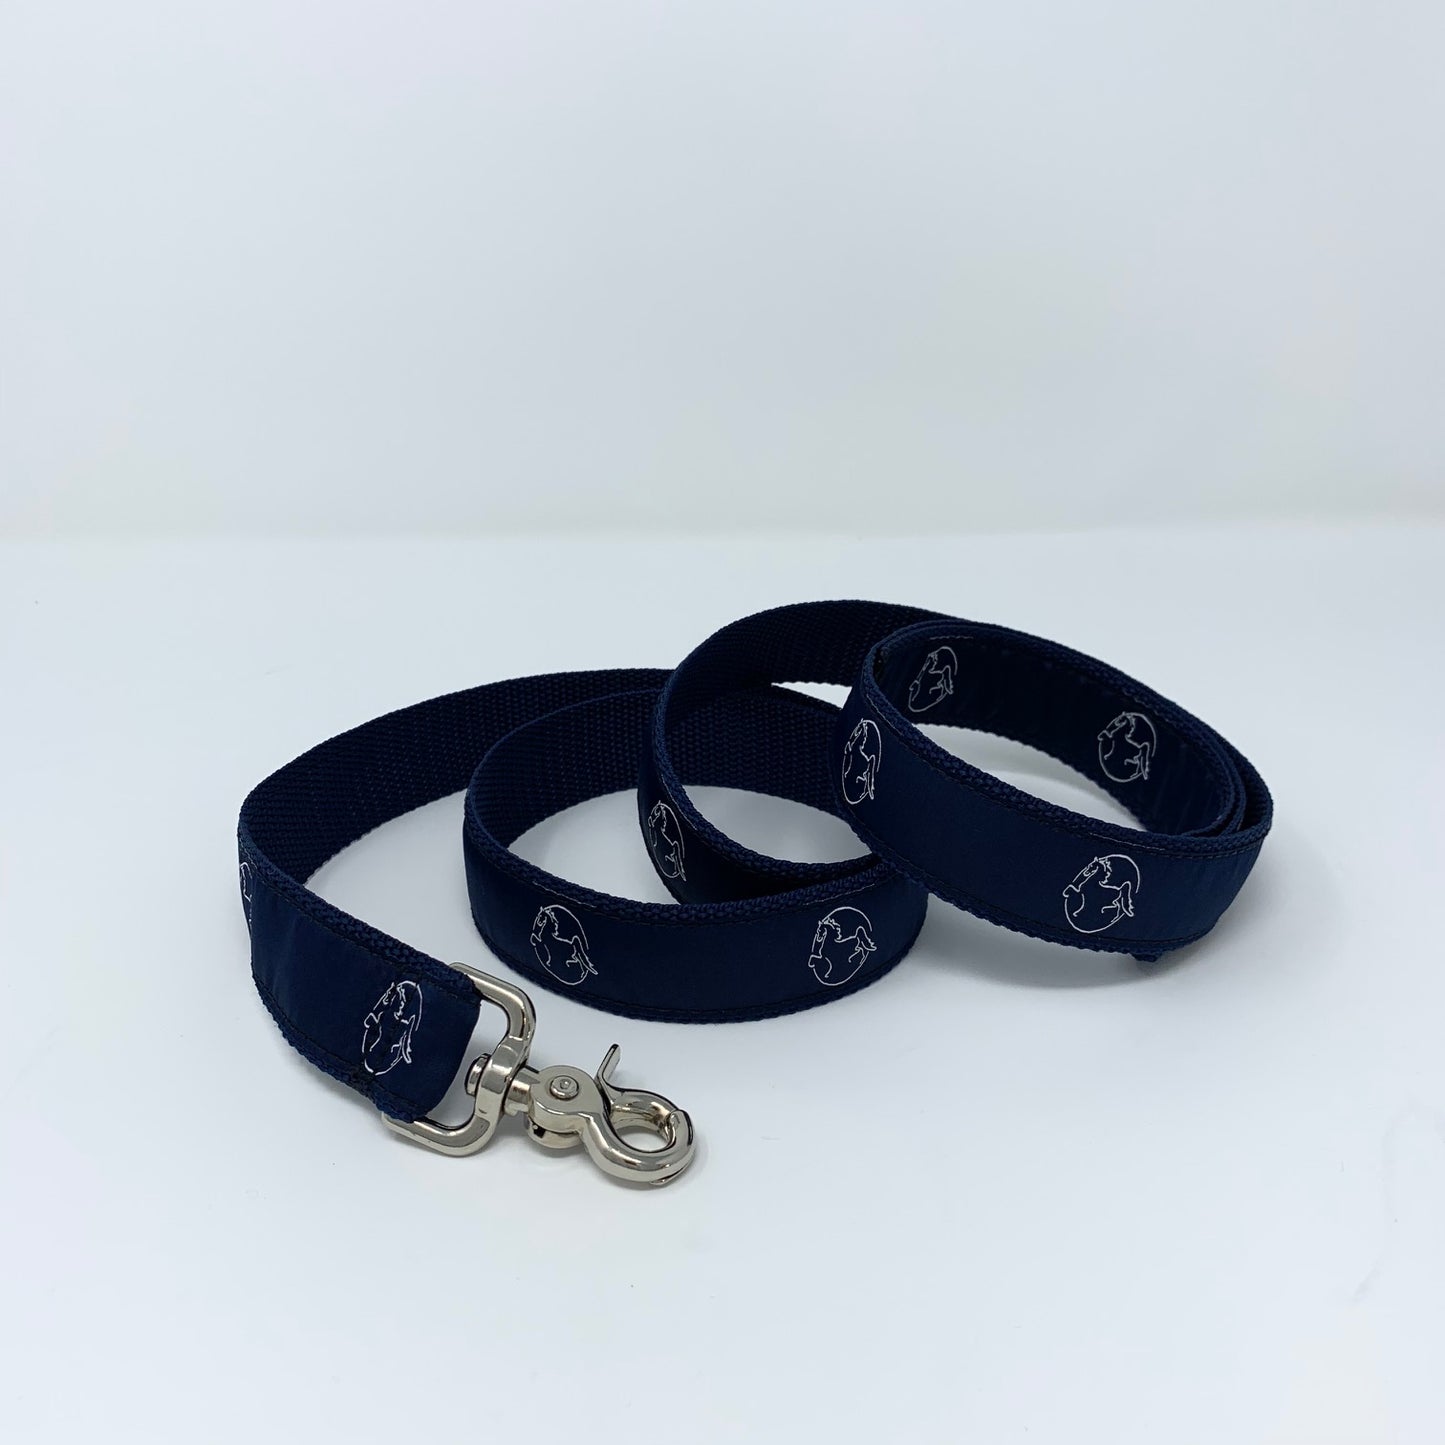 Navy Dog Leash with American Saddlebred Museum Horse Logo Repeated Curled on White Background